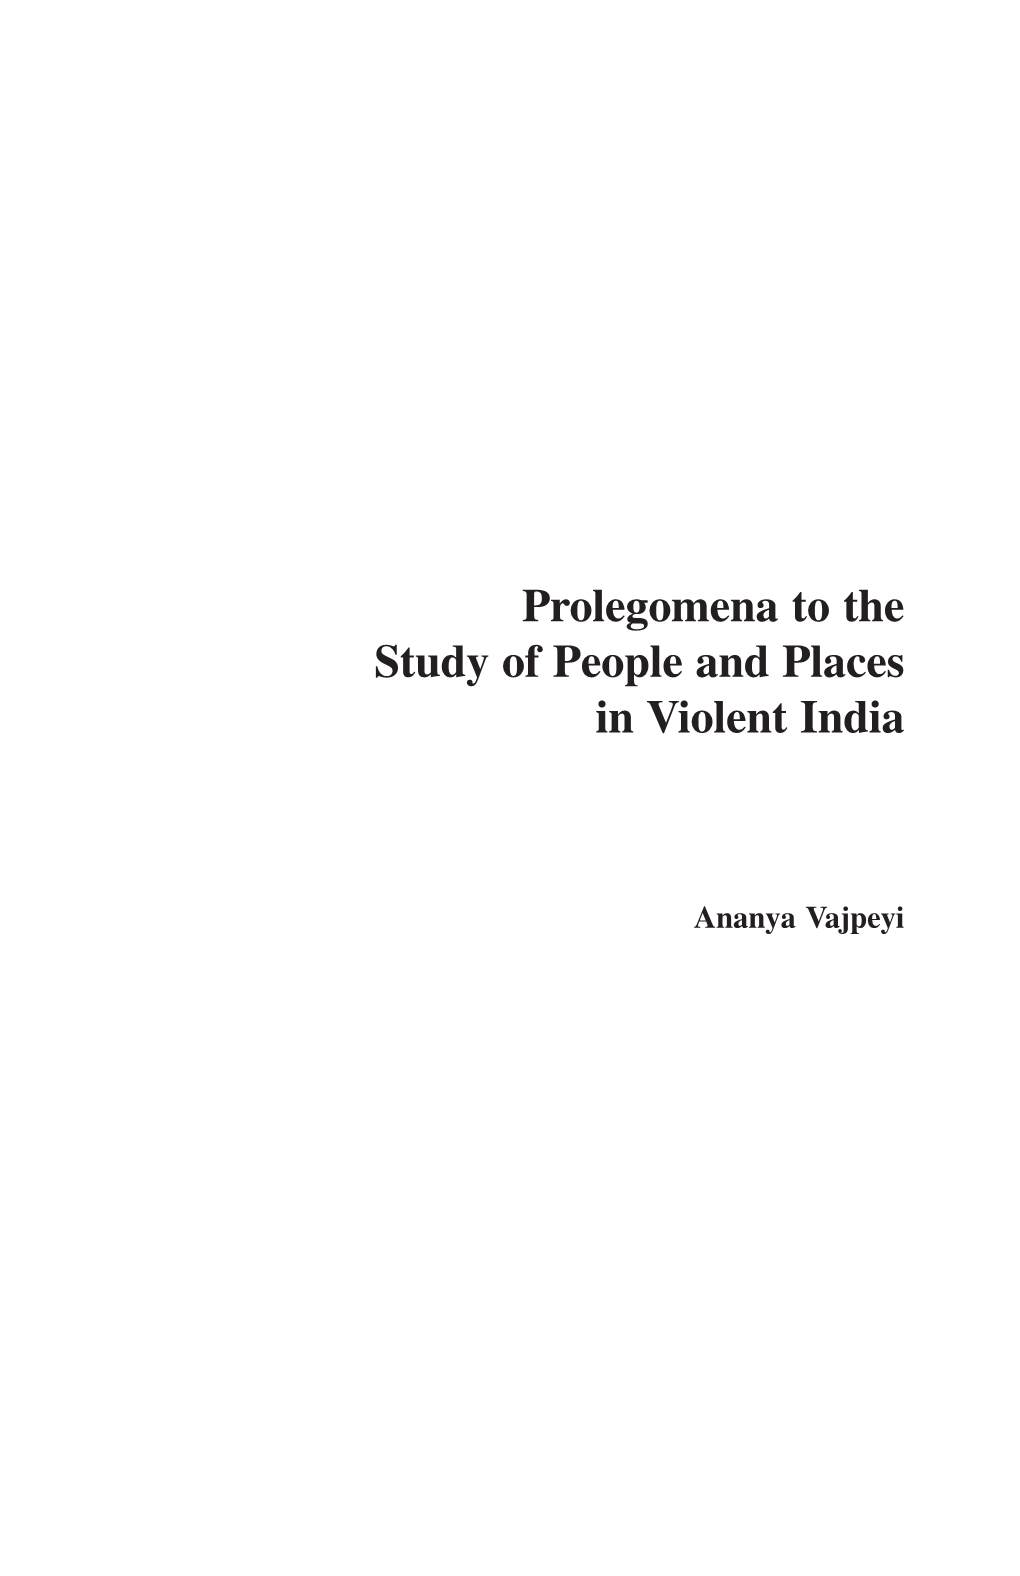 Prolegomena to the Study of People and Places in Violent India